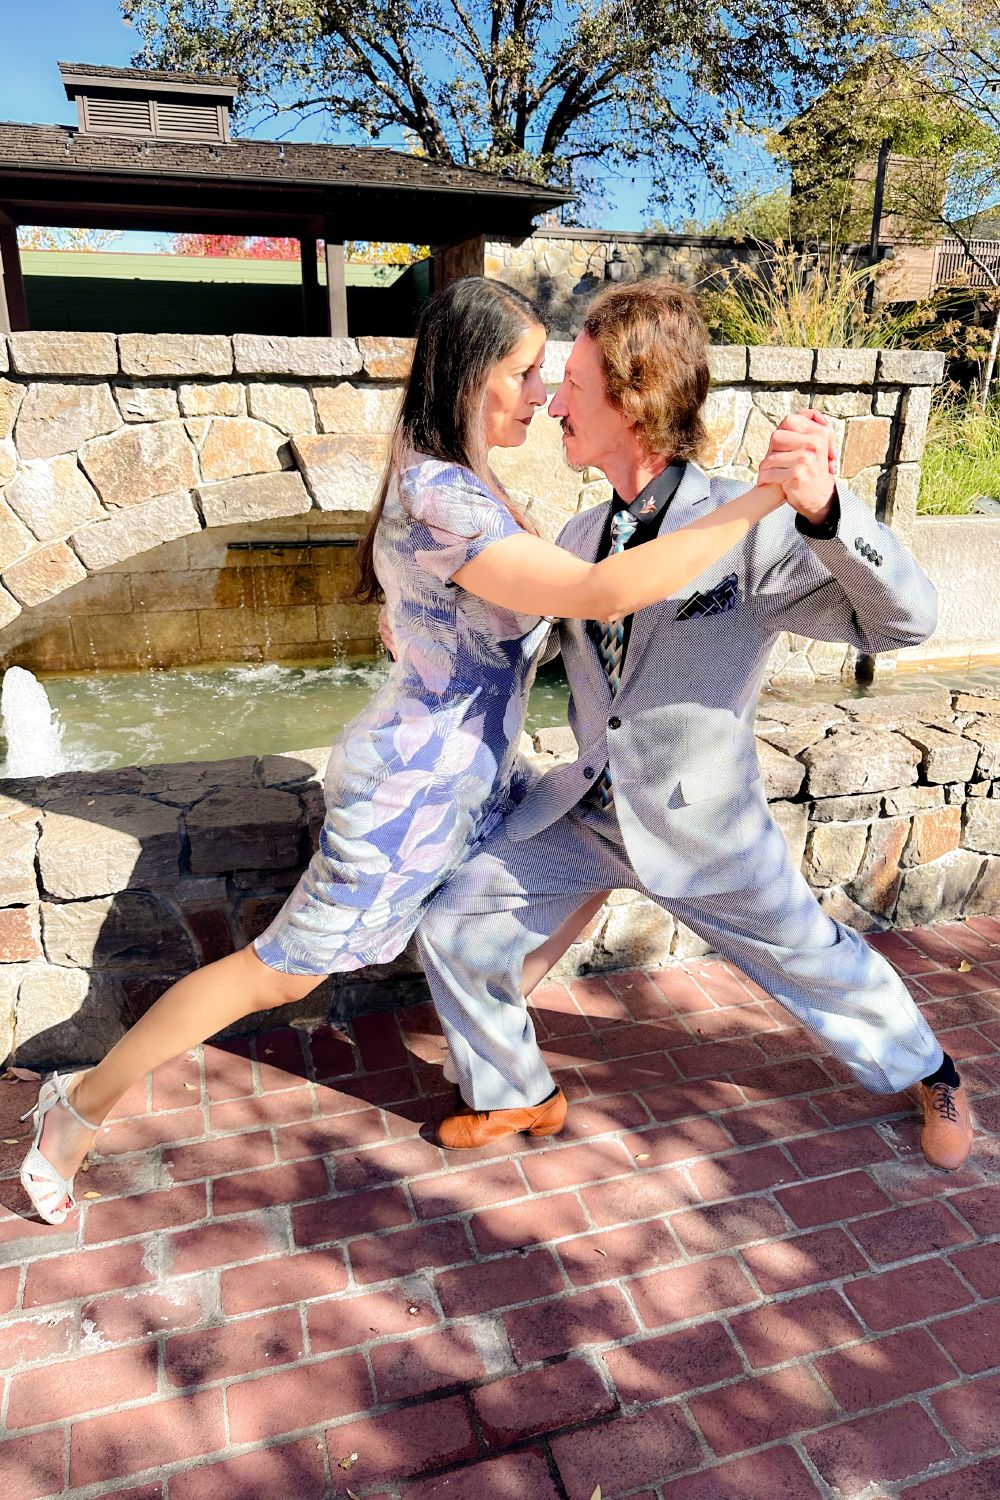 Argentine Tango dancing by Marcelo Solis and Mimi at Yountville, California